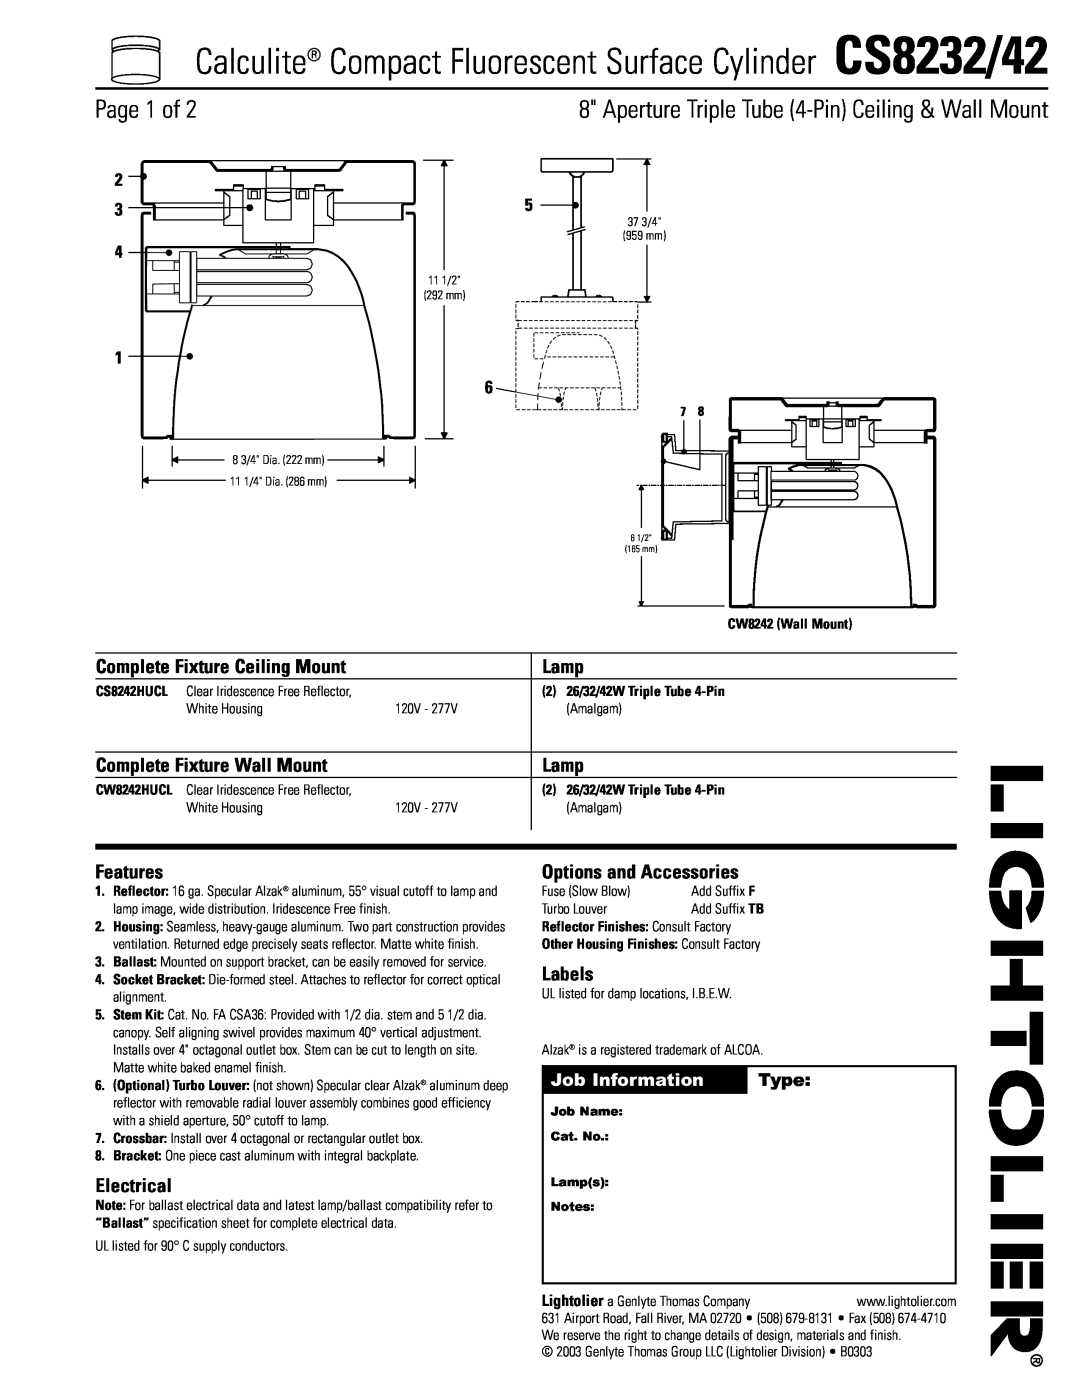 Lightolier specifications Calculite Compact Fluorescent Surface Cylinder CS8232/42, Page 1 of, Job Information, Type 